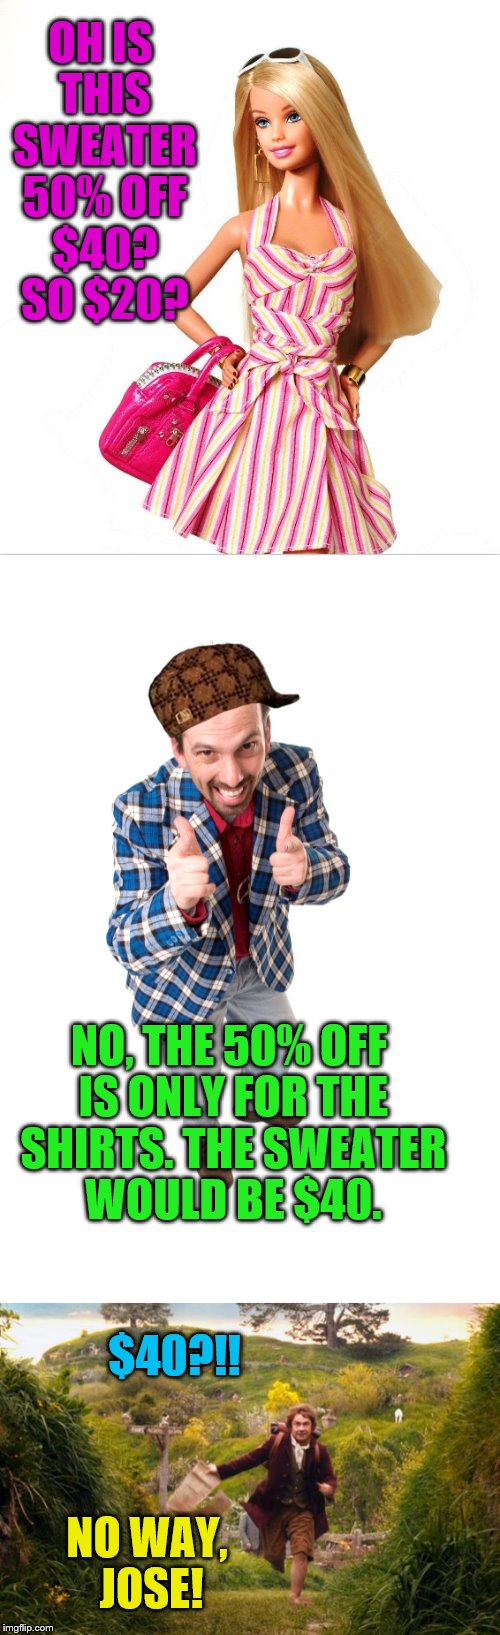 scroll down to see the whole meme | OH IS THIS SWEATER 50% OFF $40? SO $20? NO, THE 50% OFF IS ONLY FOR THE SHIRTS. THE SWEATER WOULD BE $40. $40?!! NO WAY, JOSE! | image tagged in shopping,no way jose,memes,funny | made w/ Imgflip meme maker